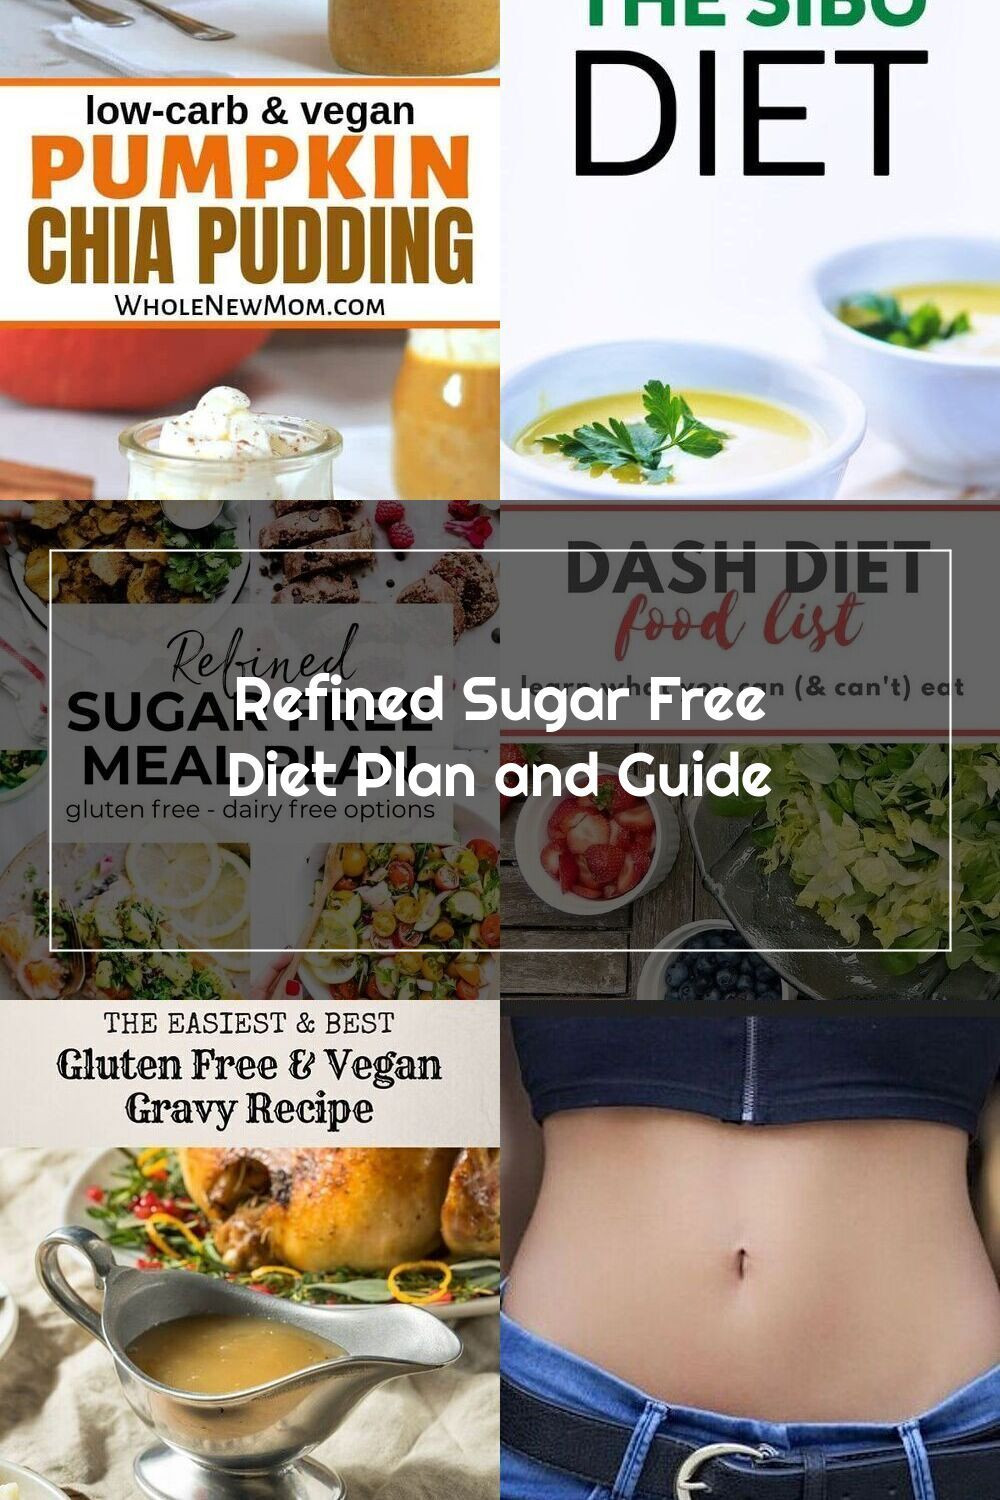 Sugar Free Vegan Plan
 This refined sugar free t plan and guide can help you